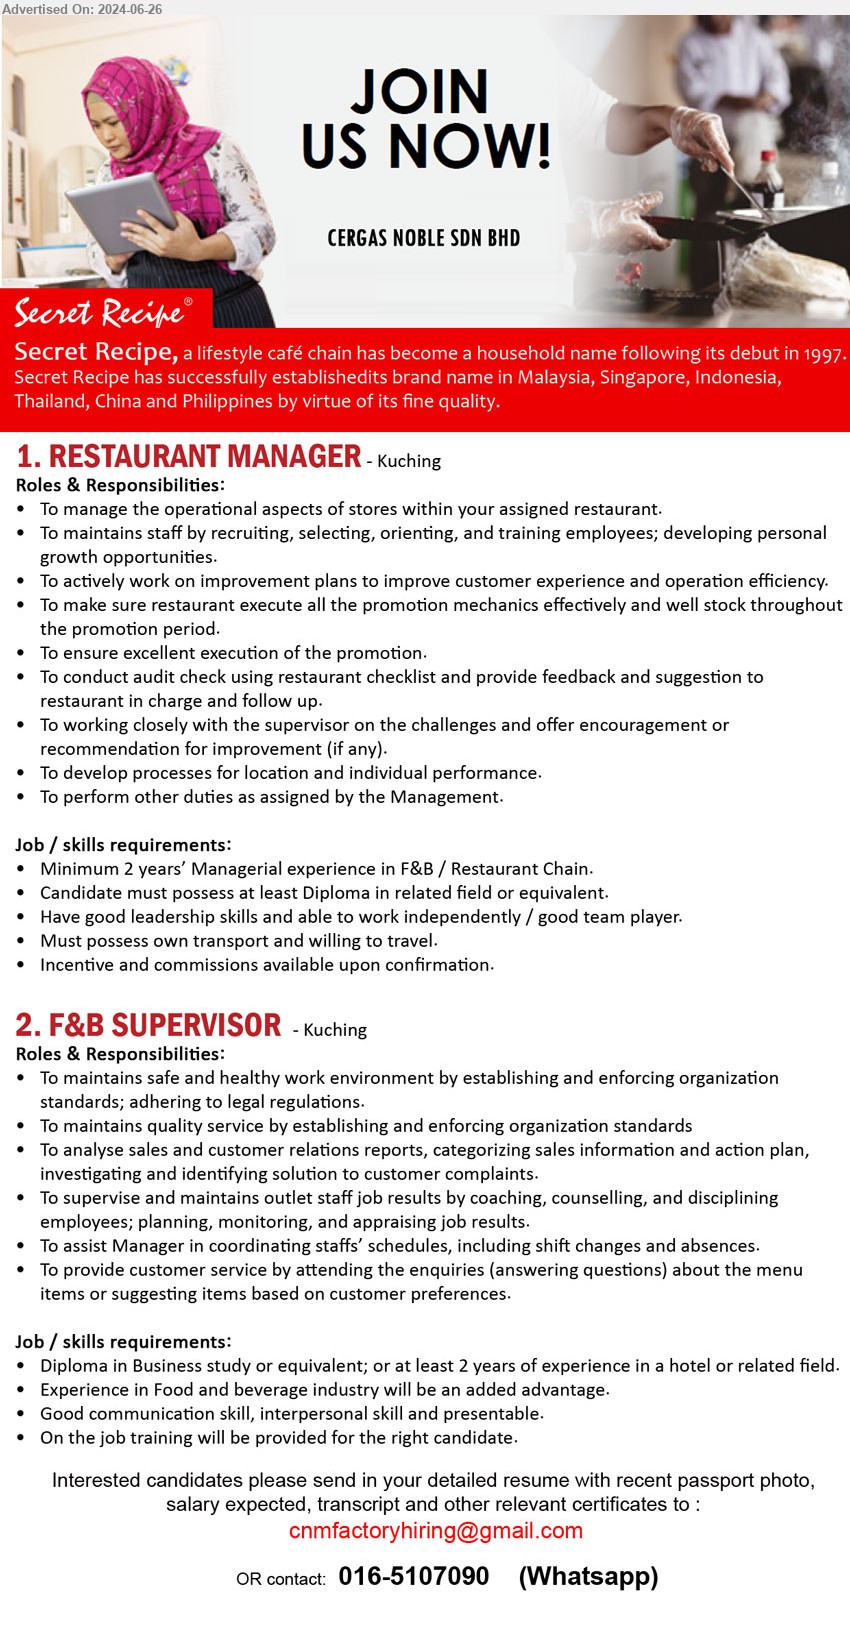 CERGAS NOBLE SDN BHD - 1. RESTAURANT MANAGER (Kuching), Minimum 2 years’ Managerial experience in F&B / Restaurant Chain, Candidate must possess at least Diploma,...
2. F&B SUPERVISOR  (Kuching), Diploma in Business study or equivalent; or at least 2 years of experience,...
Whatsapp 016-5107090   / Email resume to ...